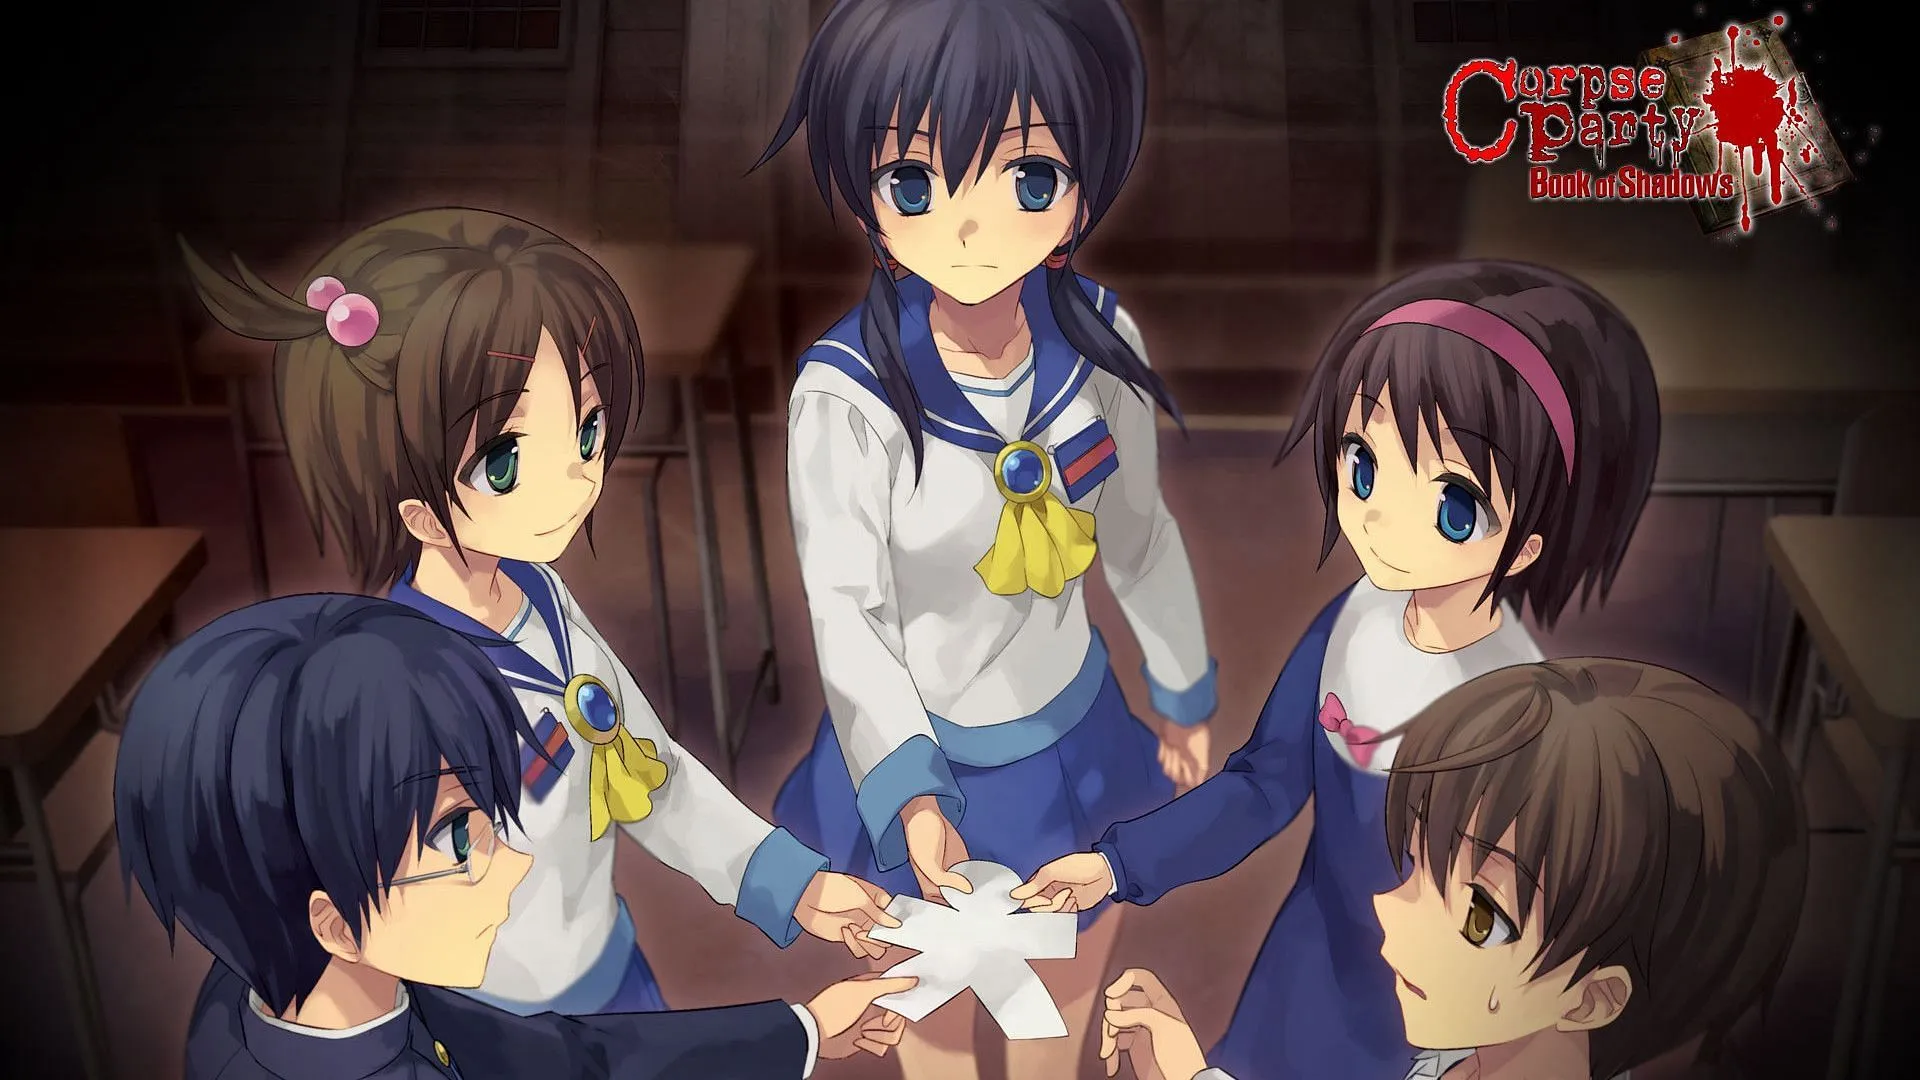 Corpse Party: Tortured Souls (immagine via Asread)